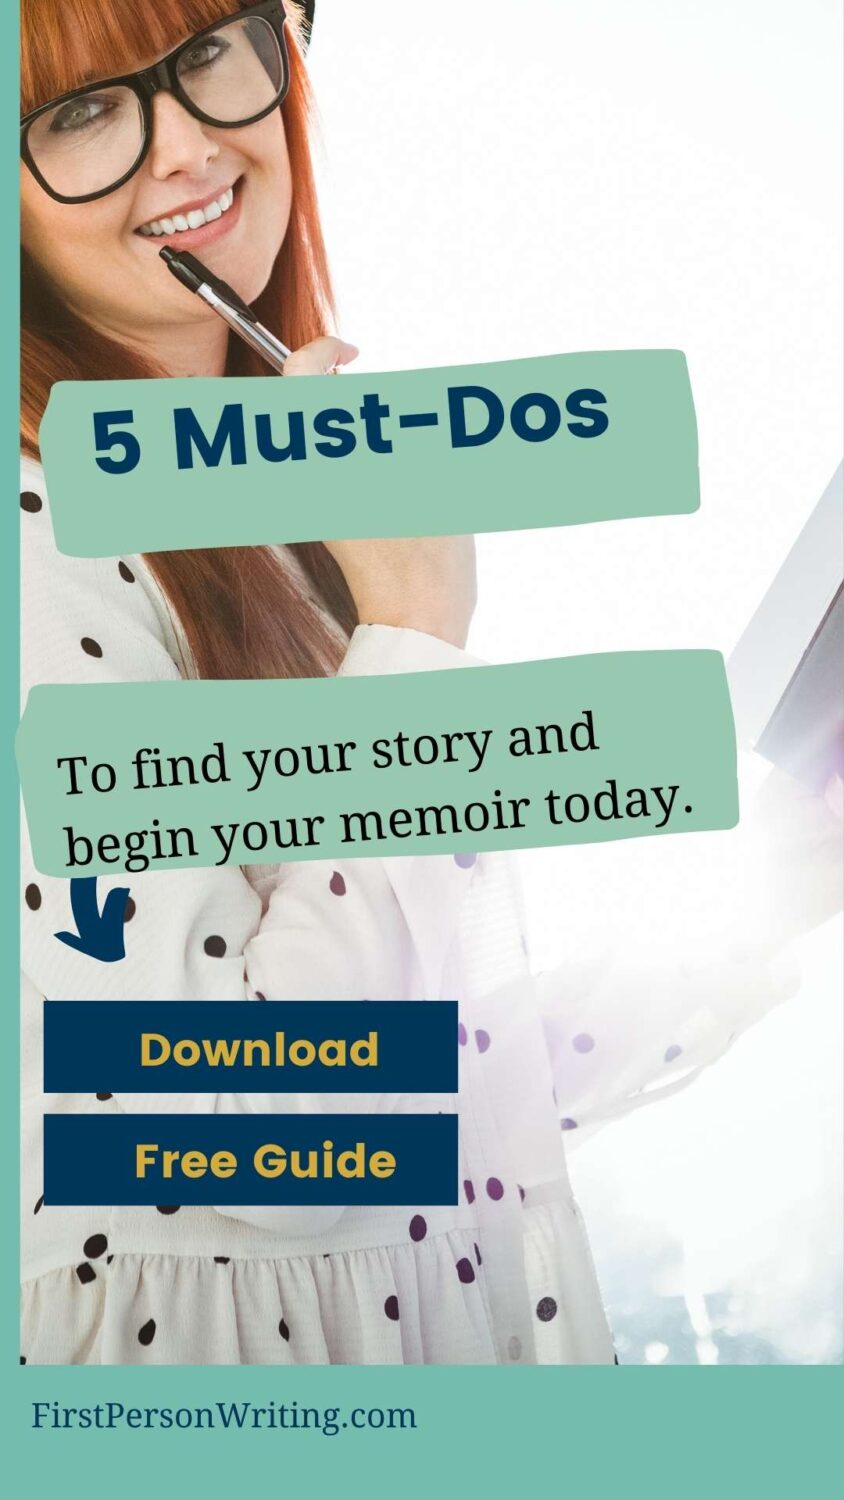 Find your story and write your memoir, free guide